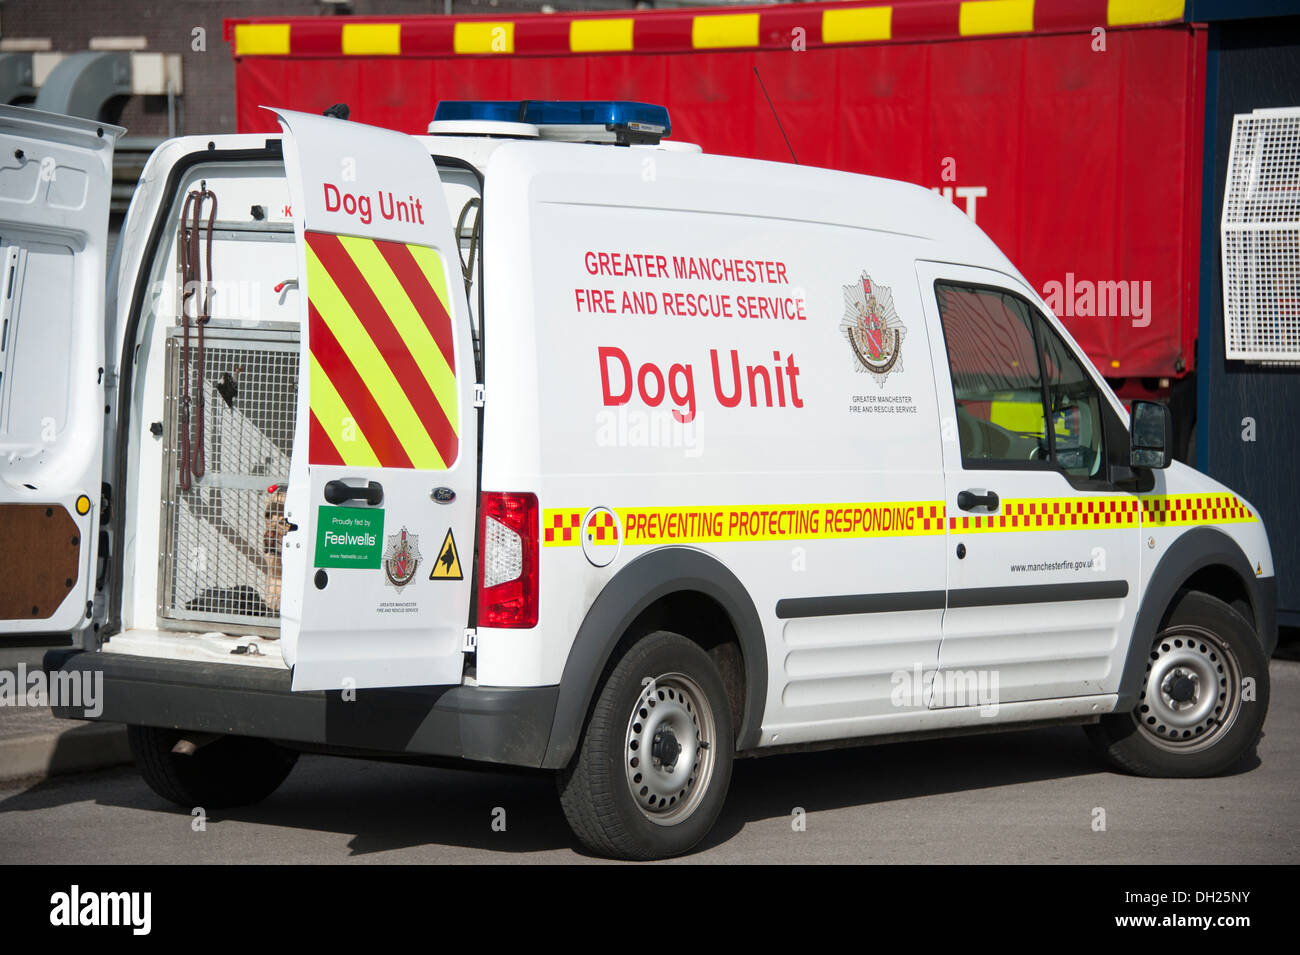 Greater Manchester Fire Dog Unit Stock Photo